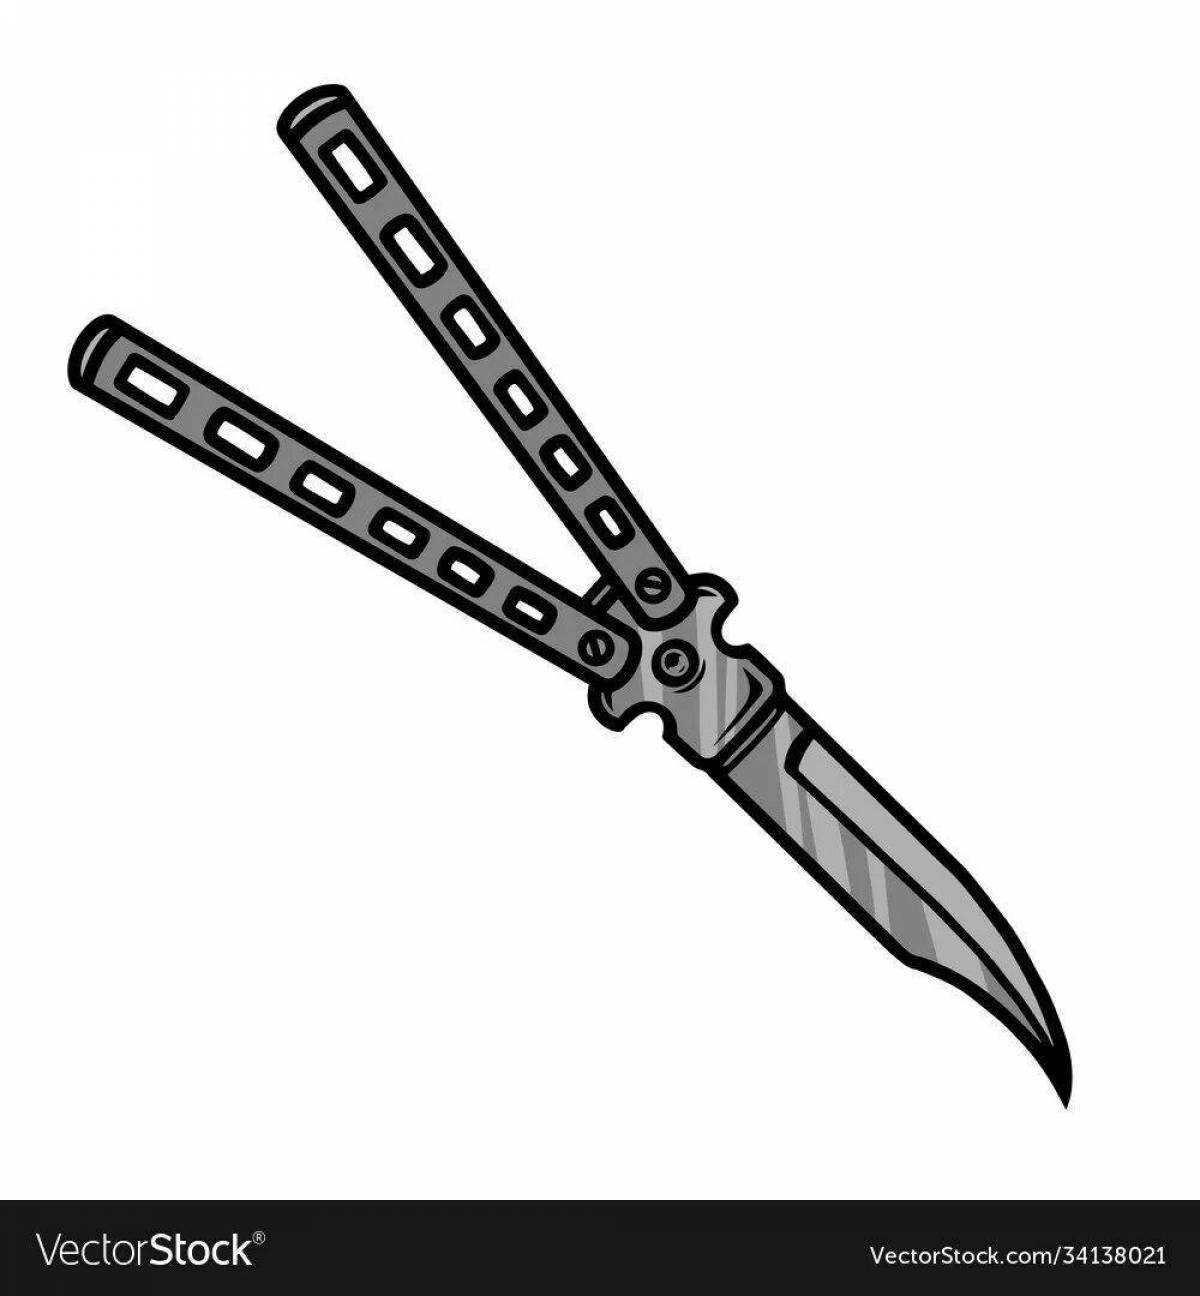 Intriguing coloring of the butterfly knife from standoff 2